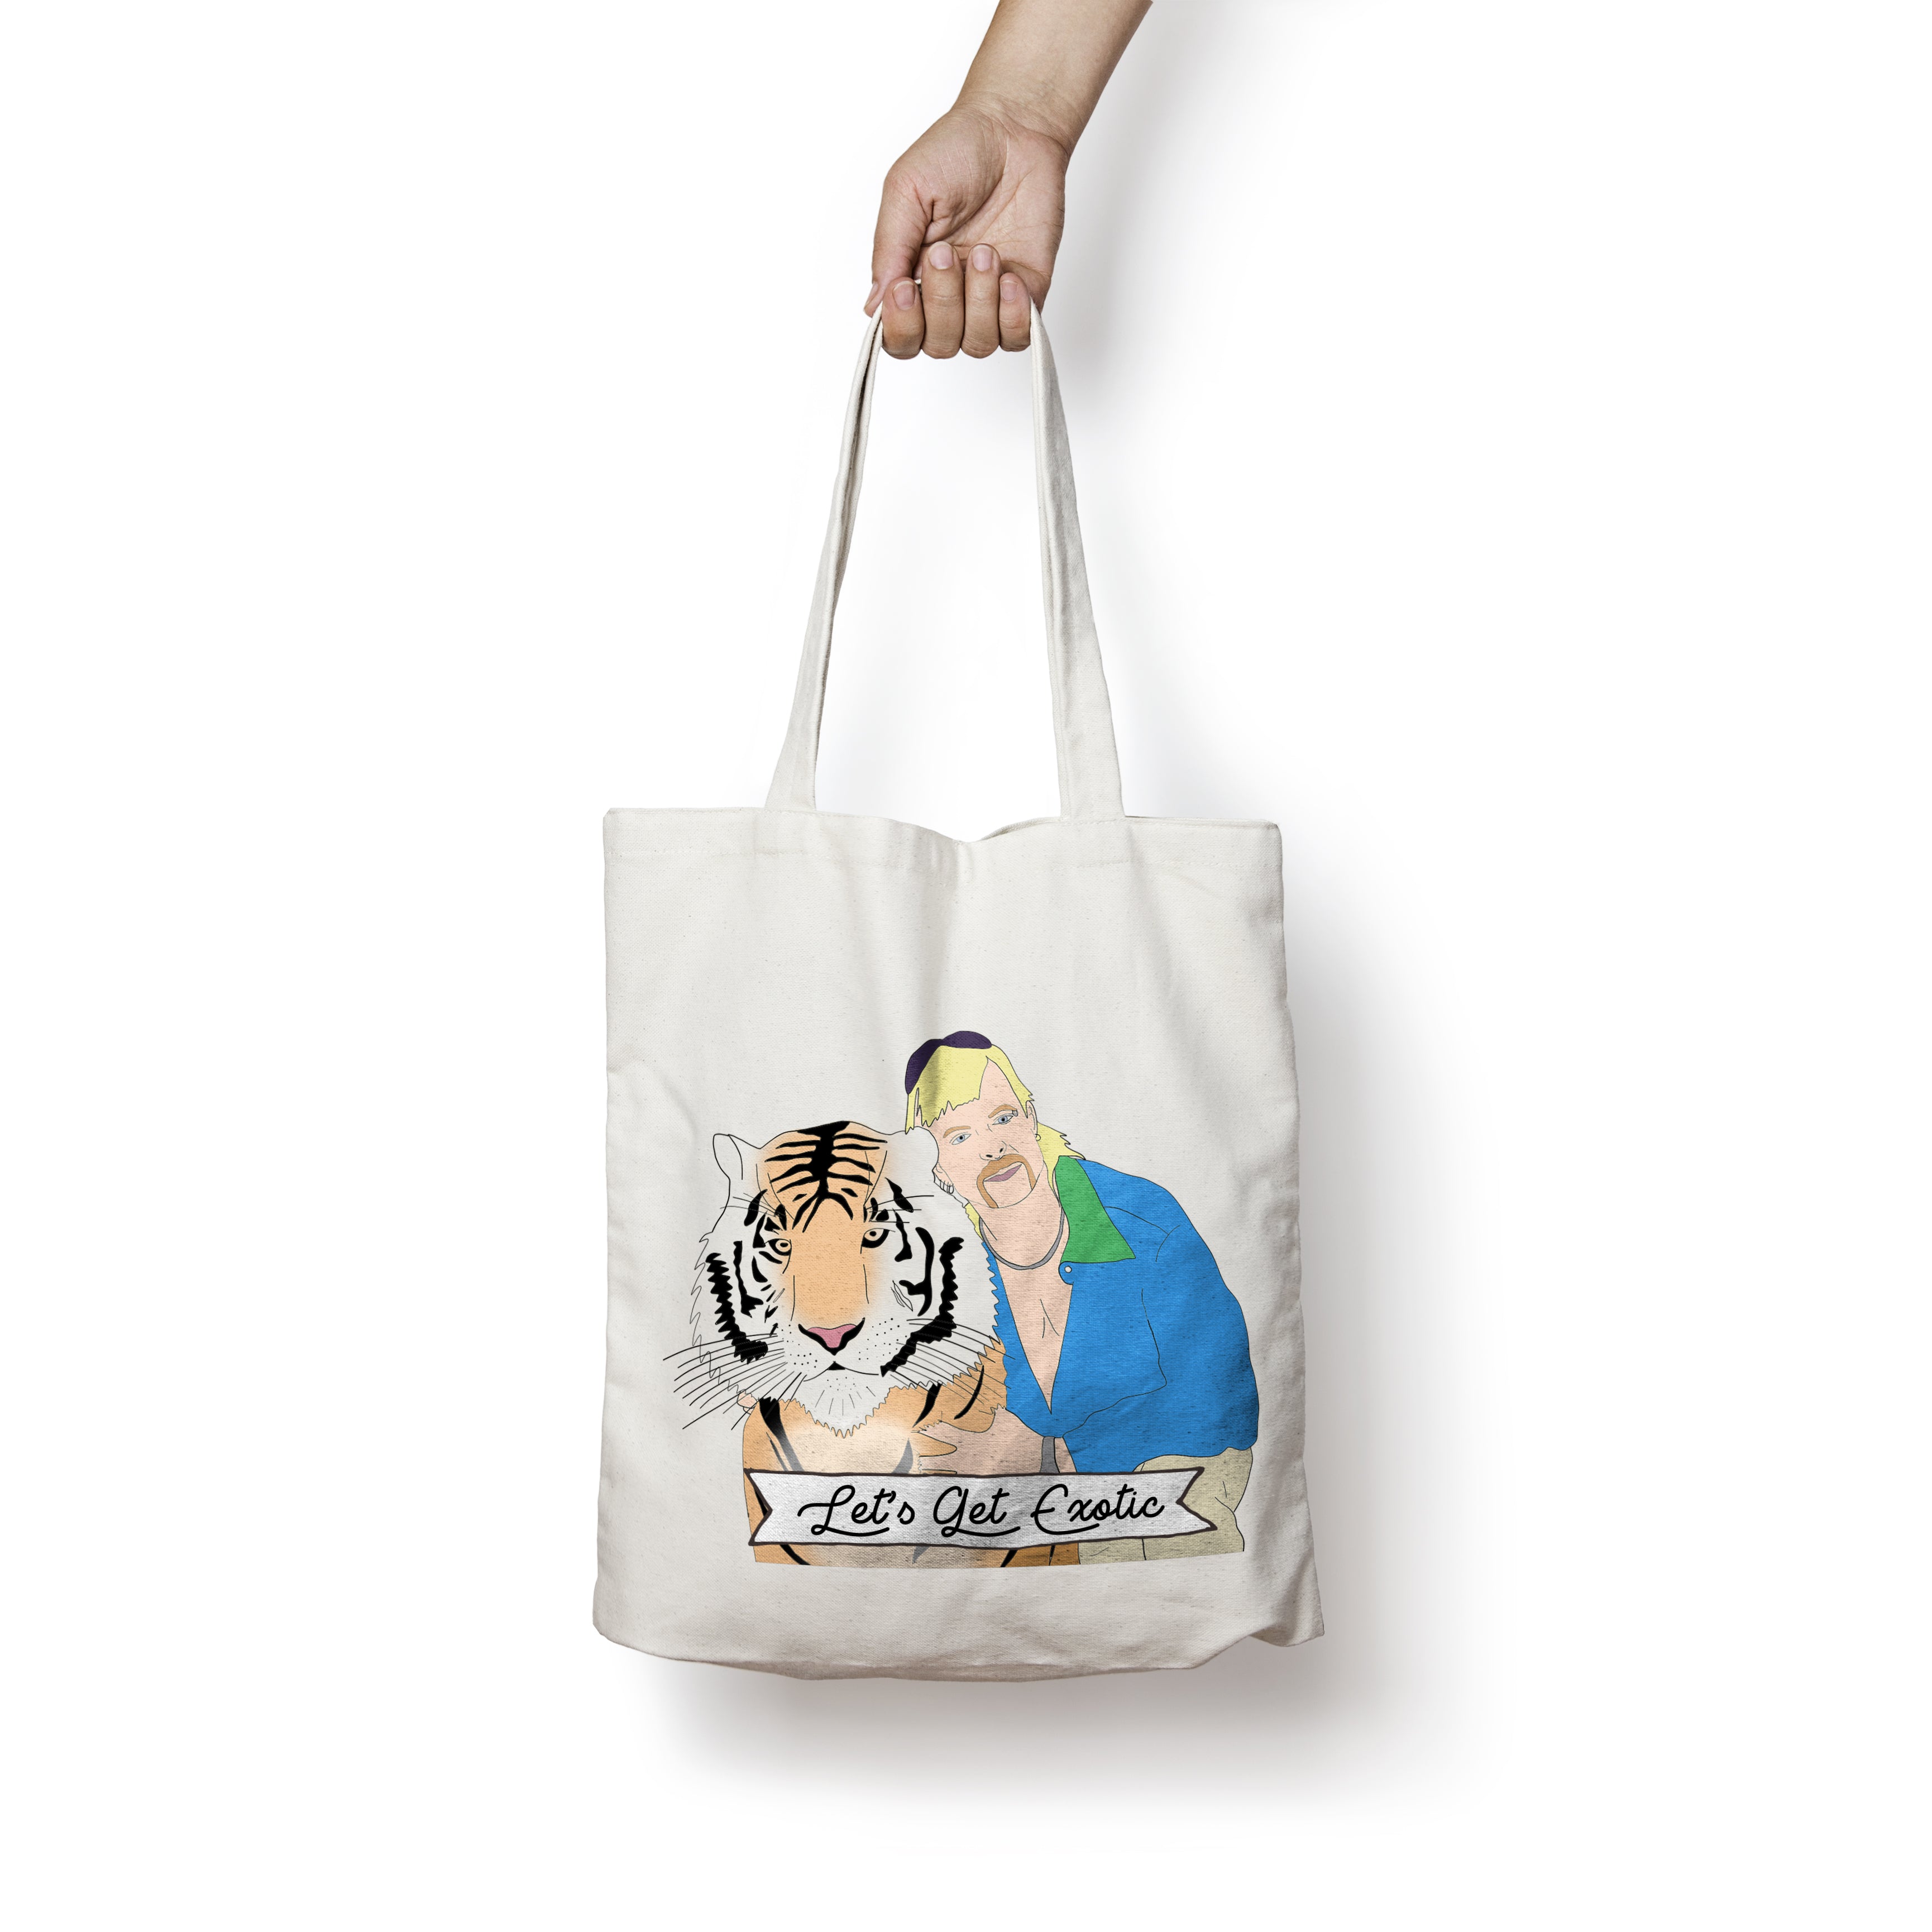 The Party Never Ends - Tote Bag – The Chainsmokers Store